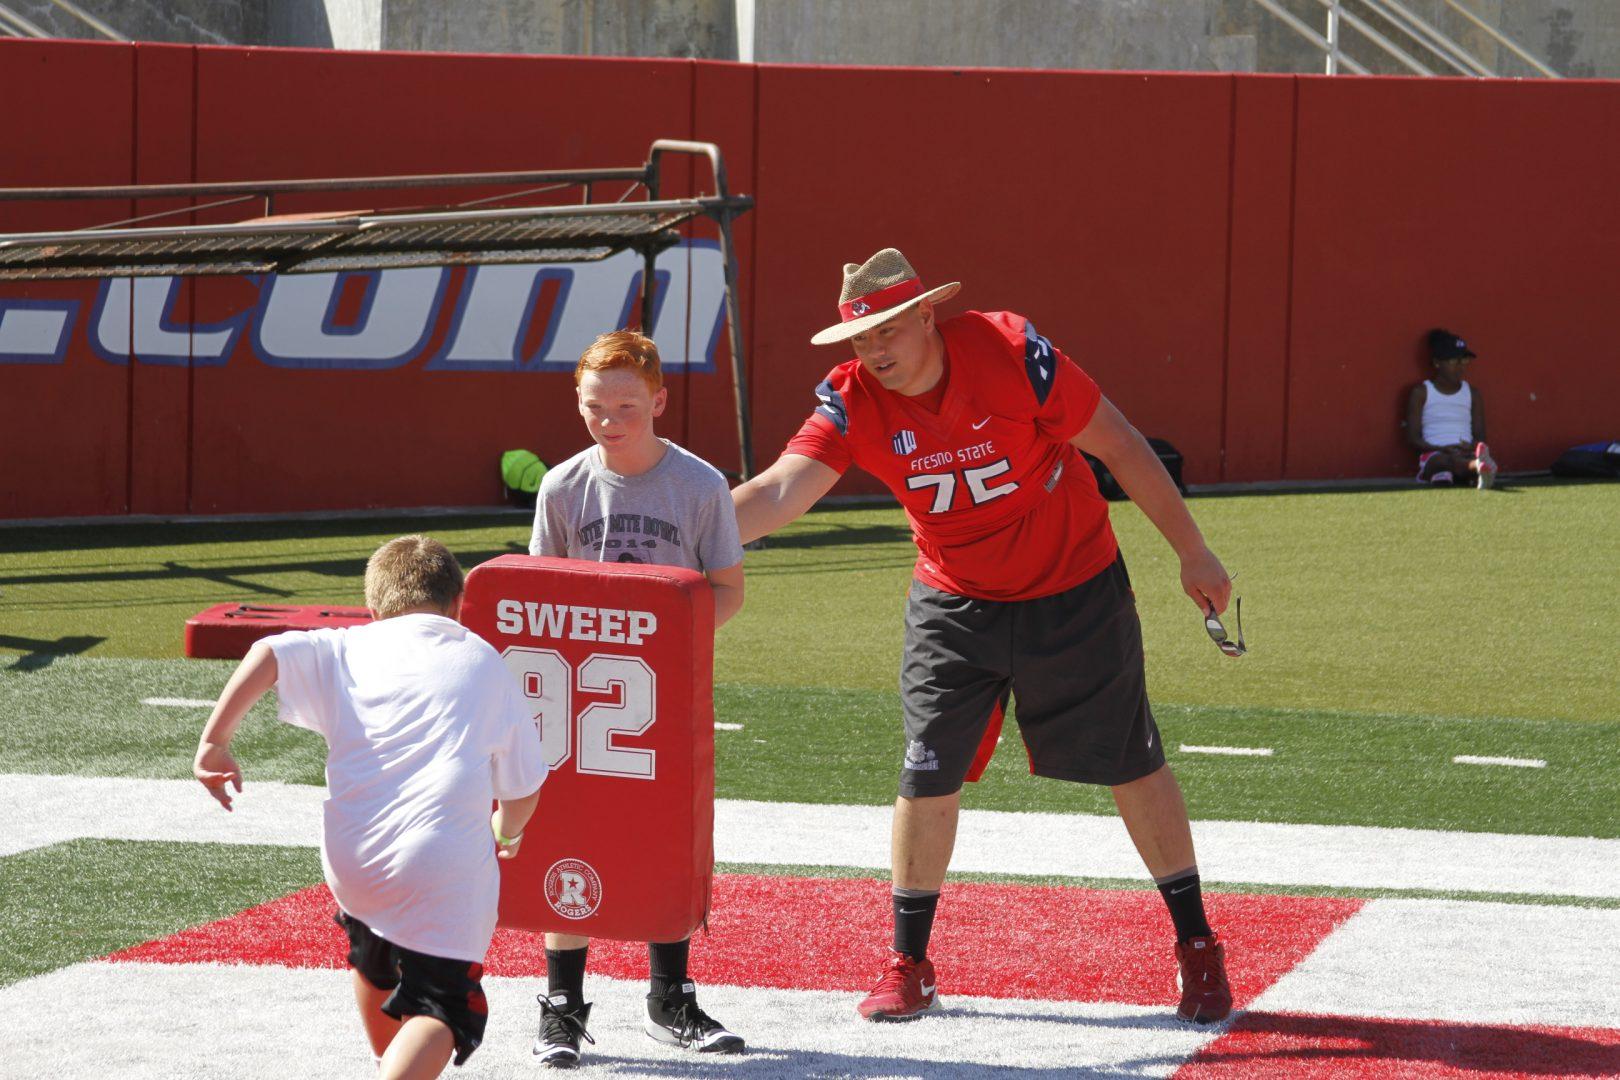 Offensive lineman Jacob Vazquez volunteers with the youth at a Bulldog football clinic. (Fresno State Athletics)